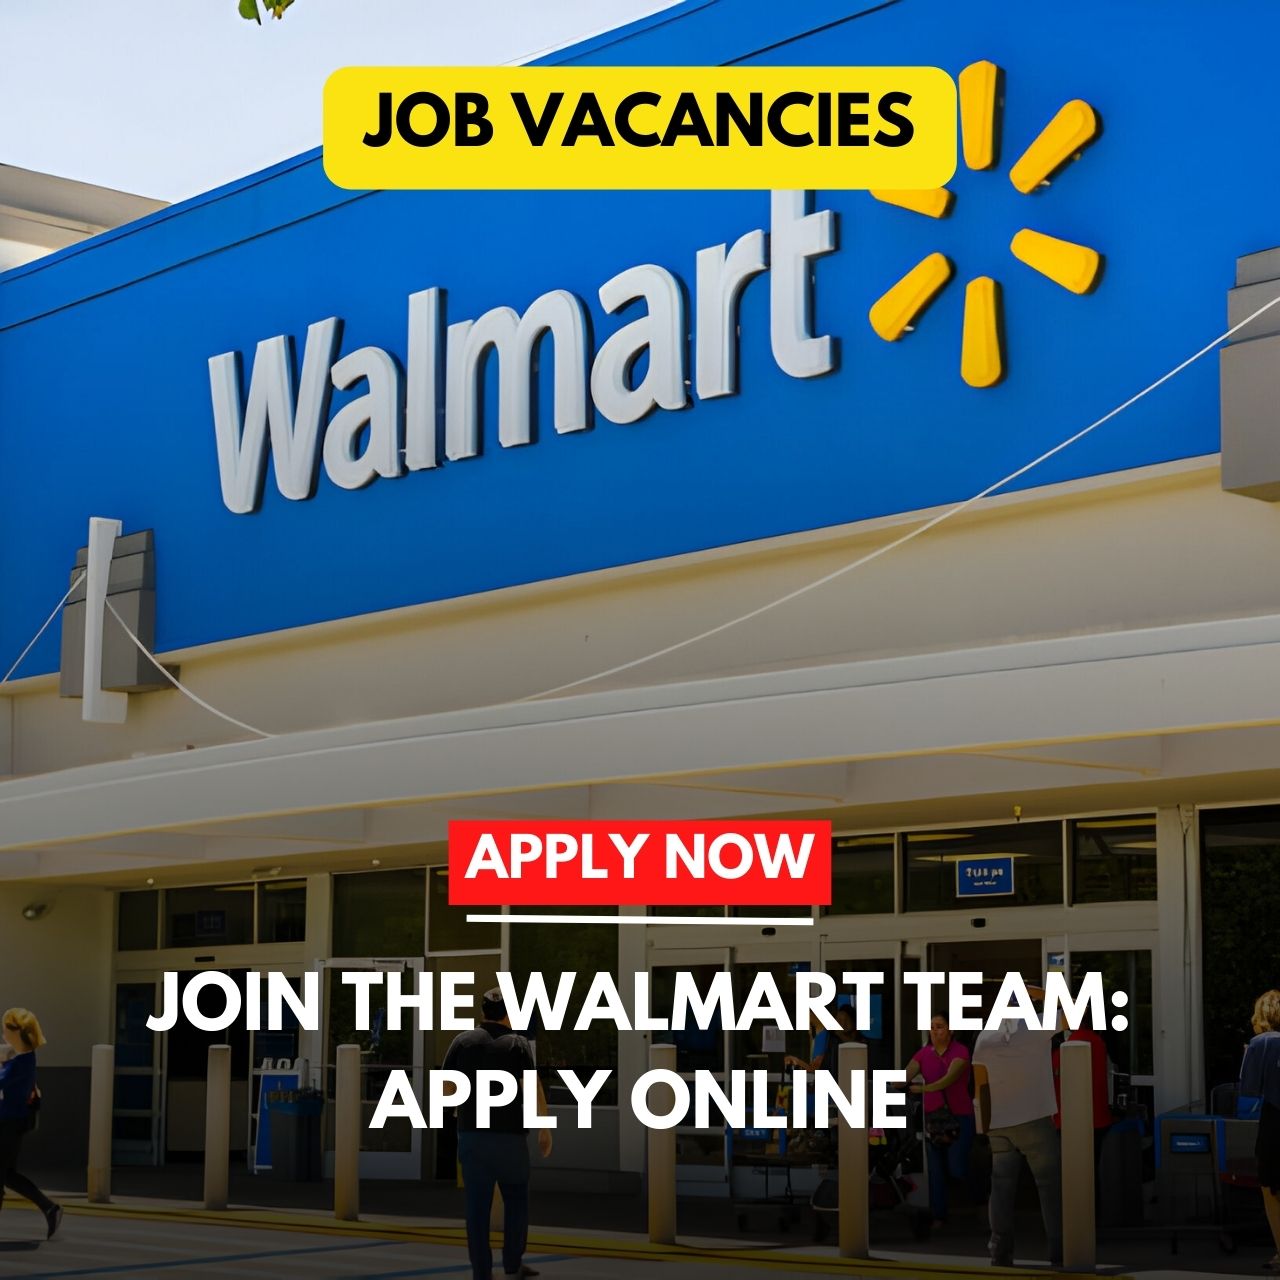 Walmart Hiring: Learn the Step-by-Step on How to Apply Online for a Job